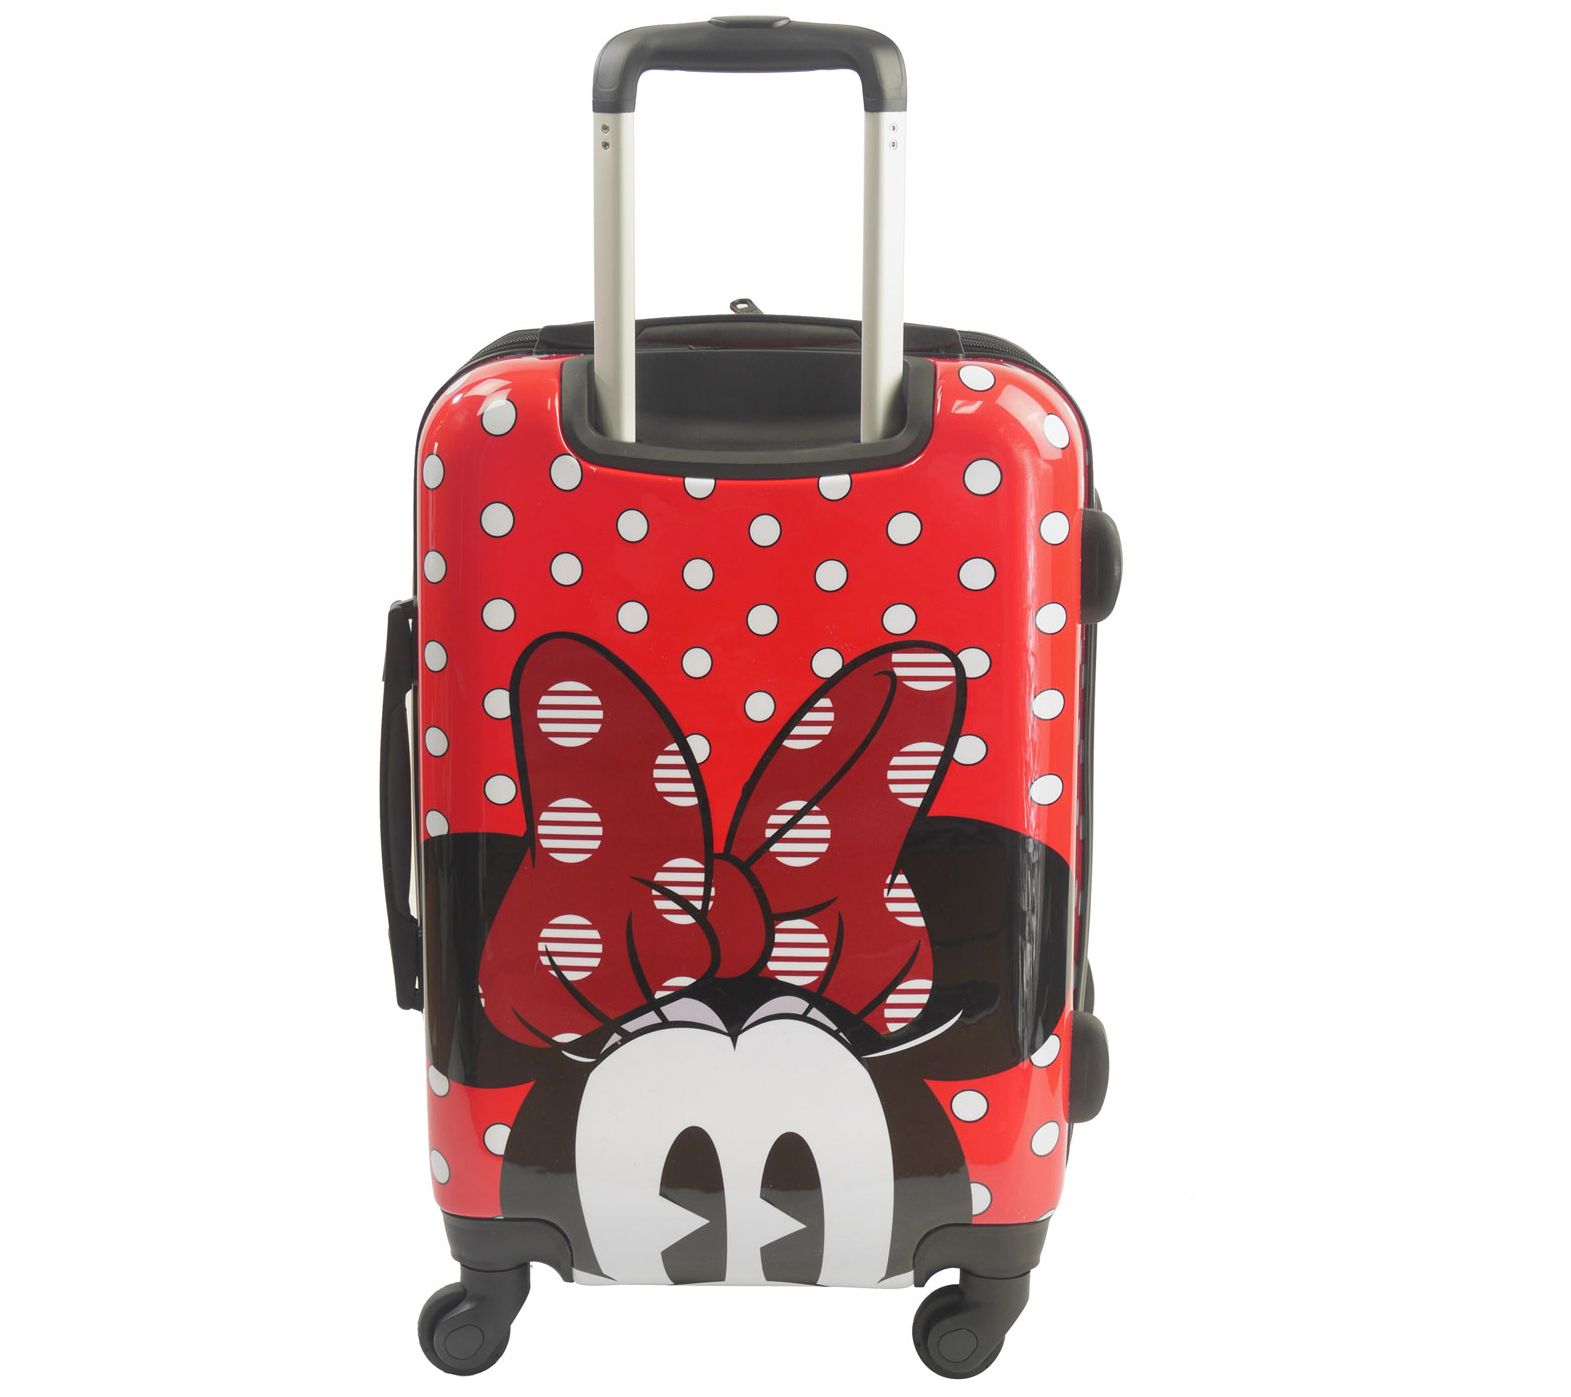 Ful Disney Minnie Mouse Polka Dot 21 Spinner Luggage